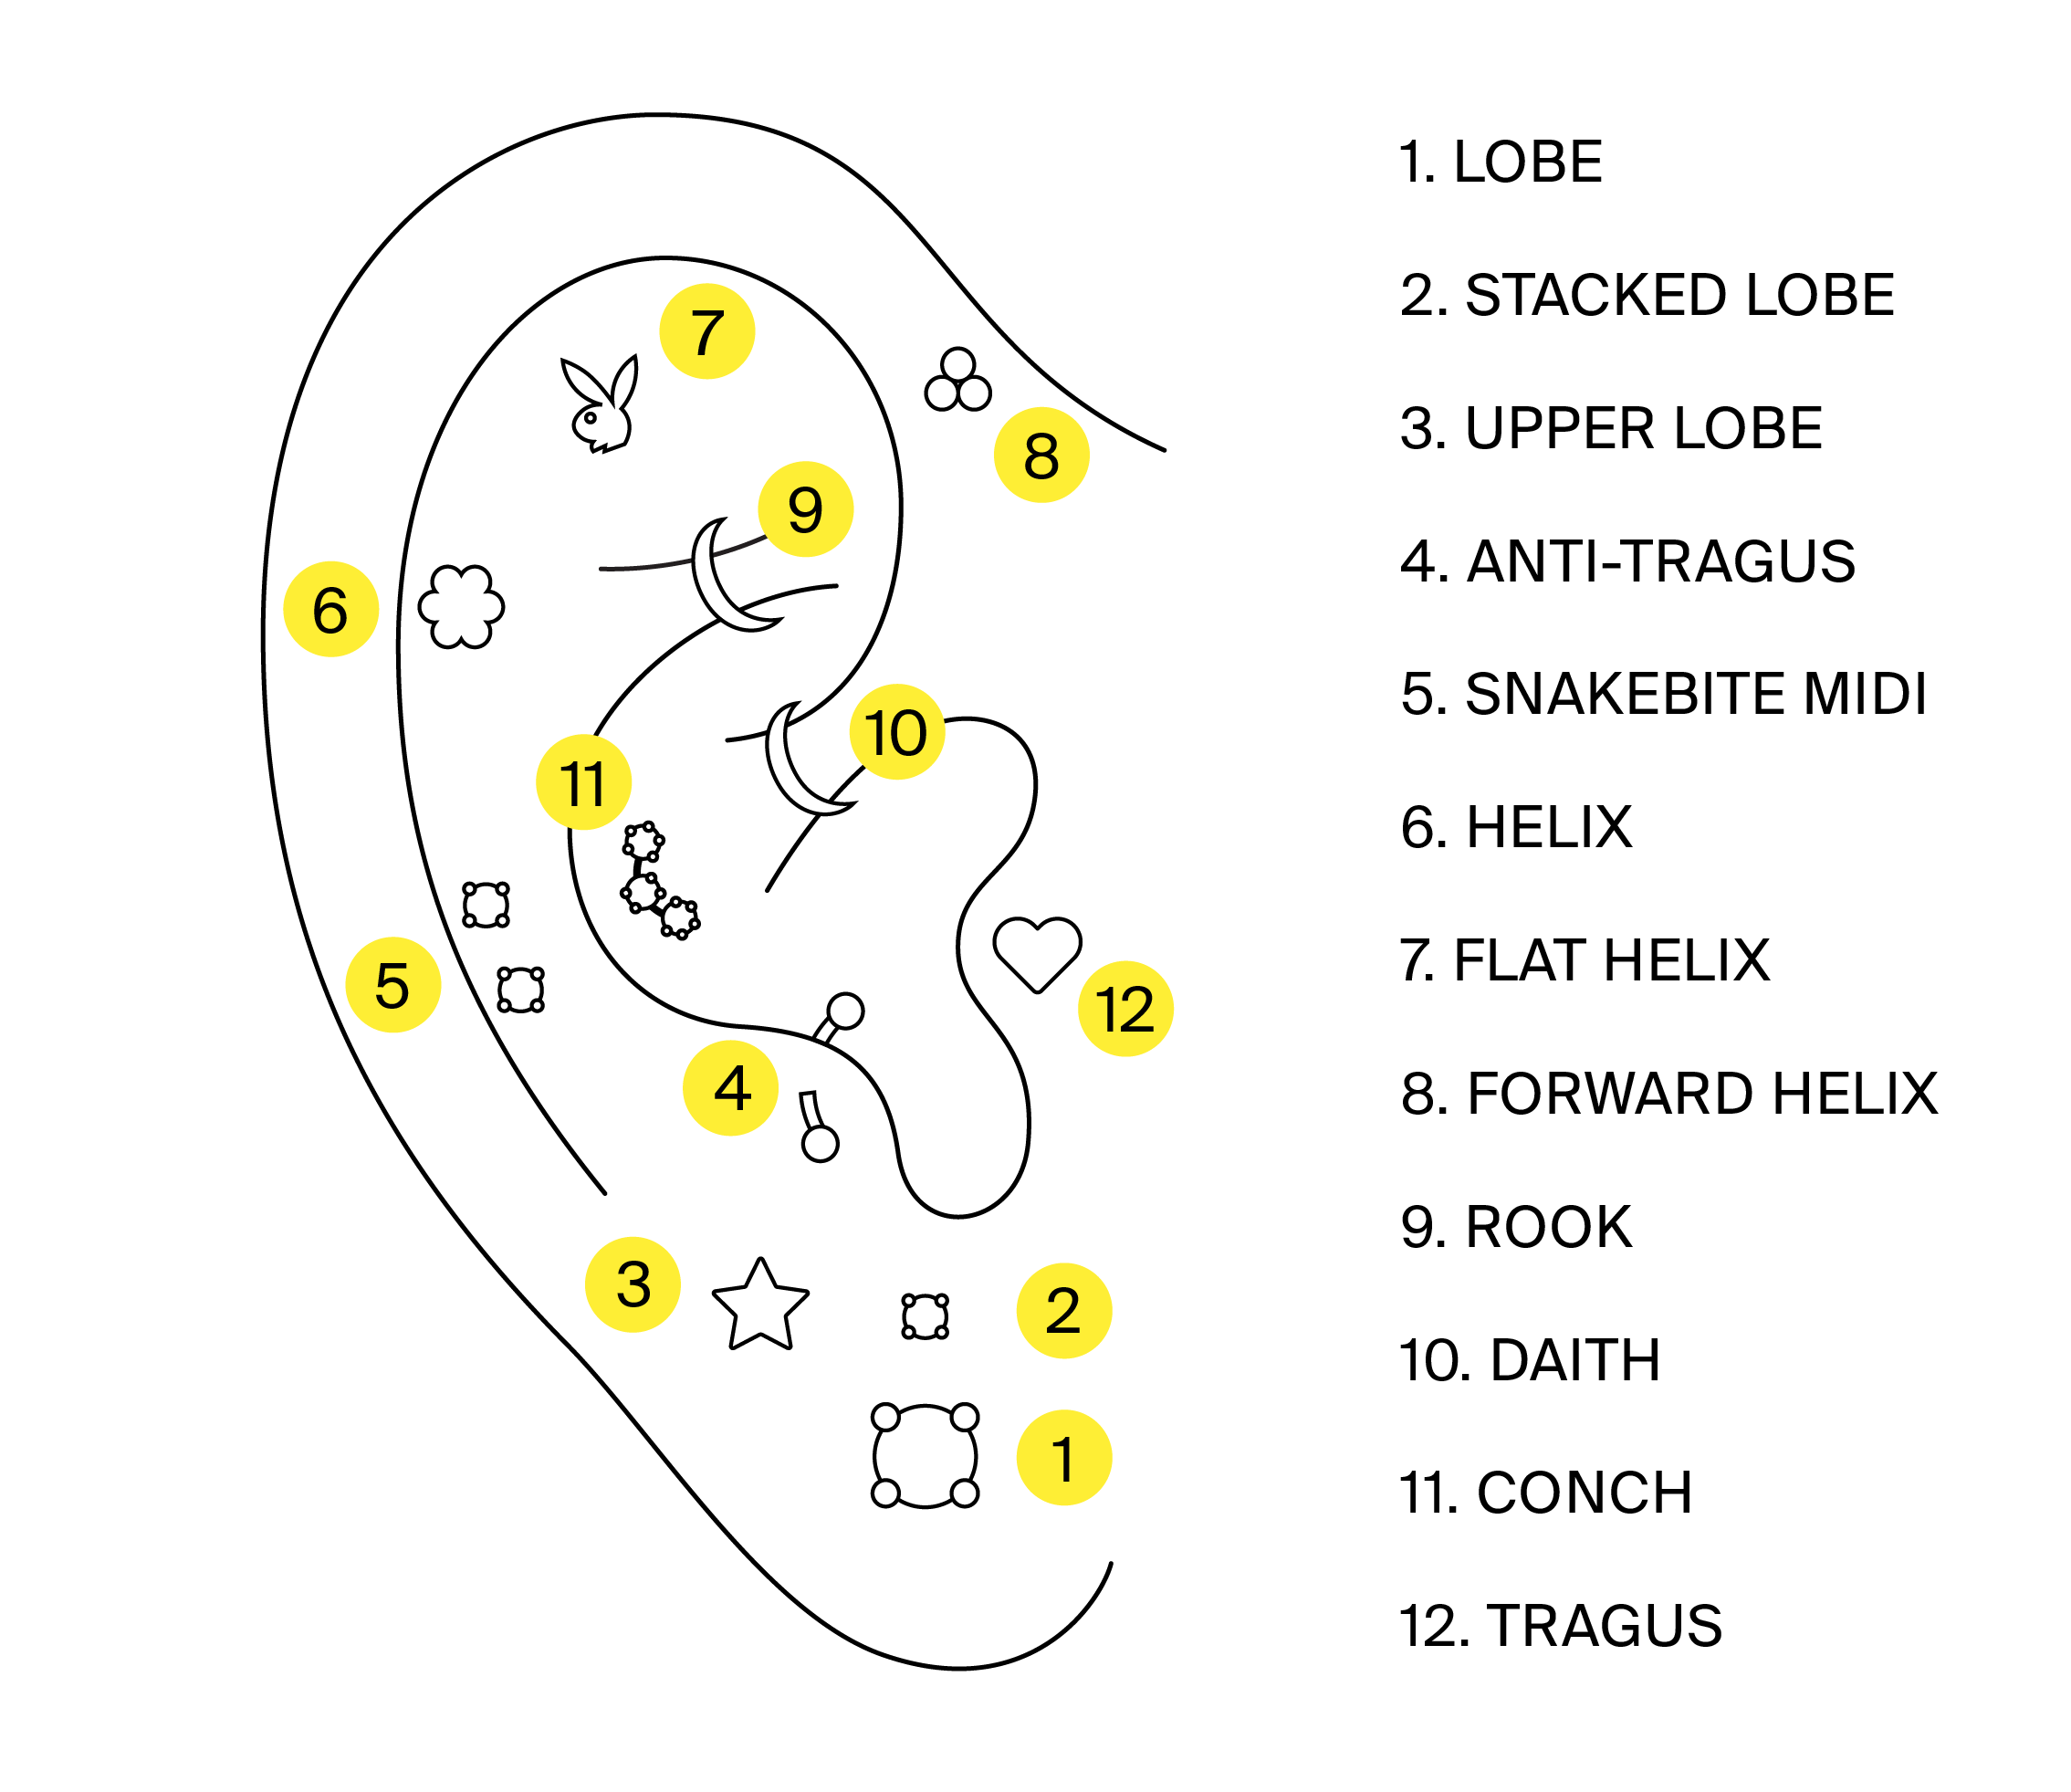 Illustration of ear mapping piercing names to locations.